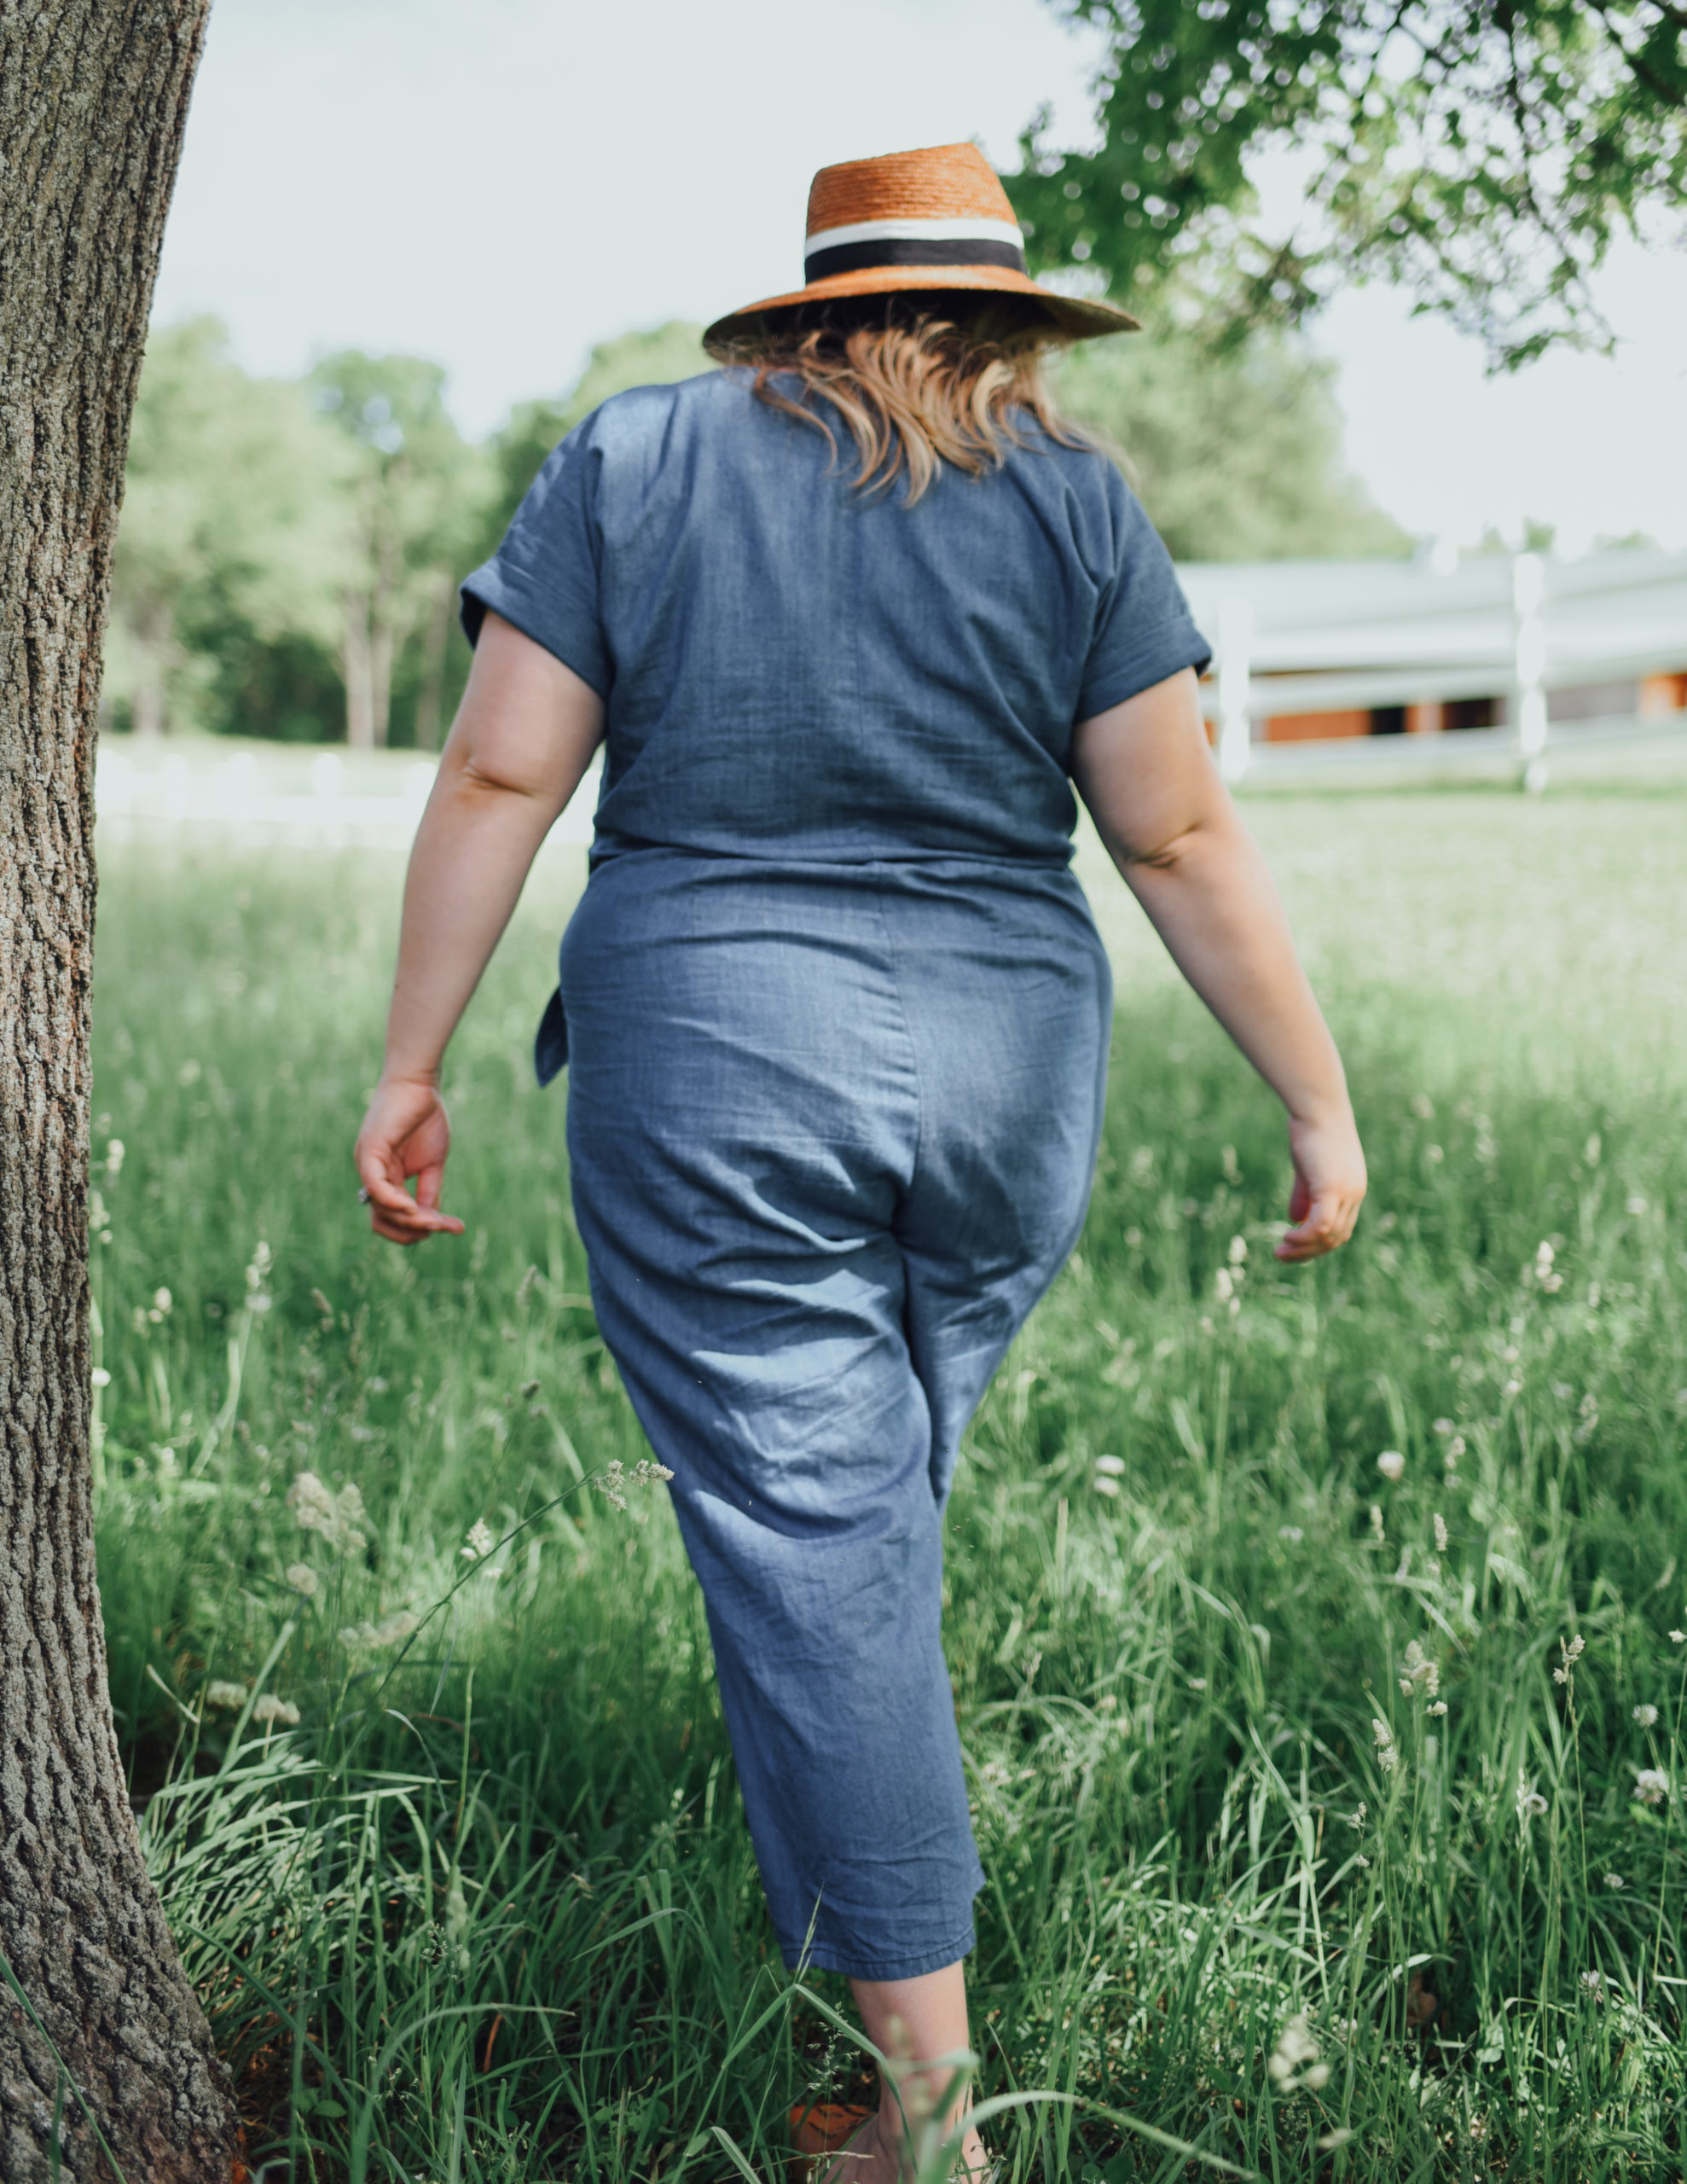 Styling A Jumpsuit For Summer. Sharing a beautiful chambray jumpsuit from Eloquii, and how I styled it for a casual summer outfit.